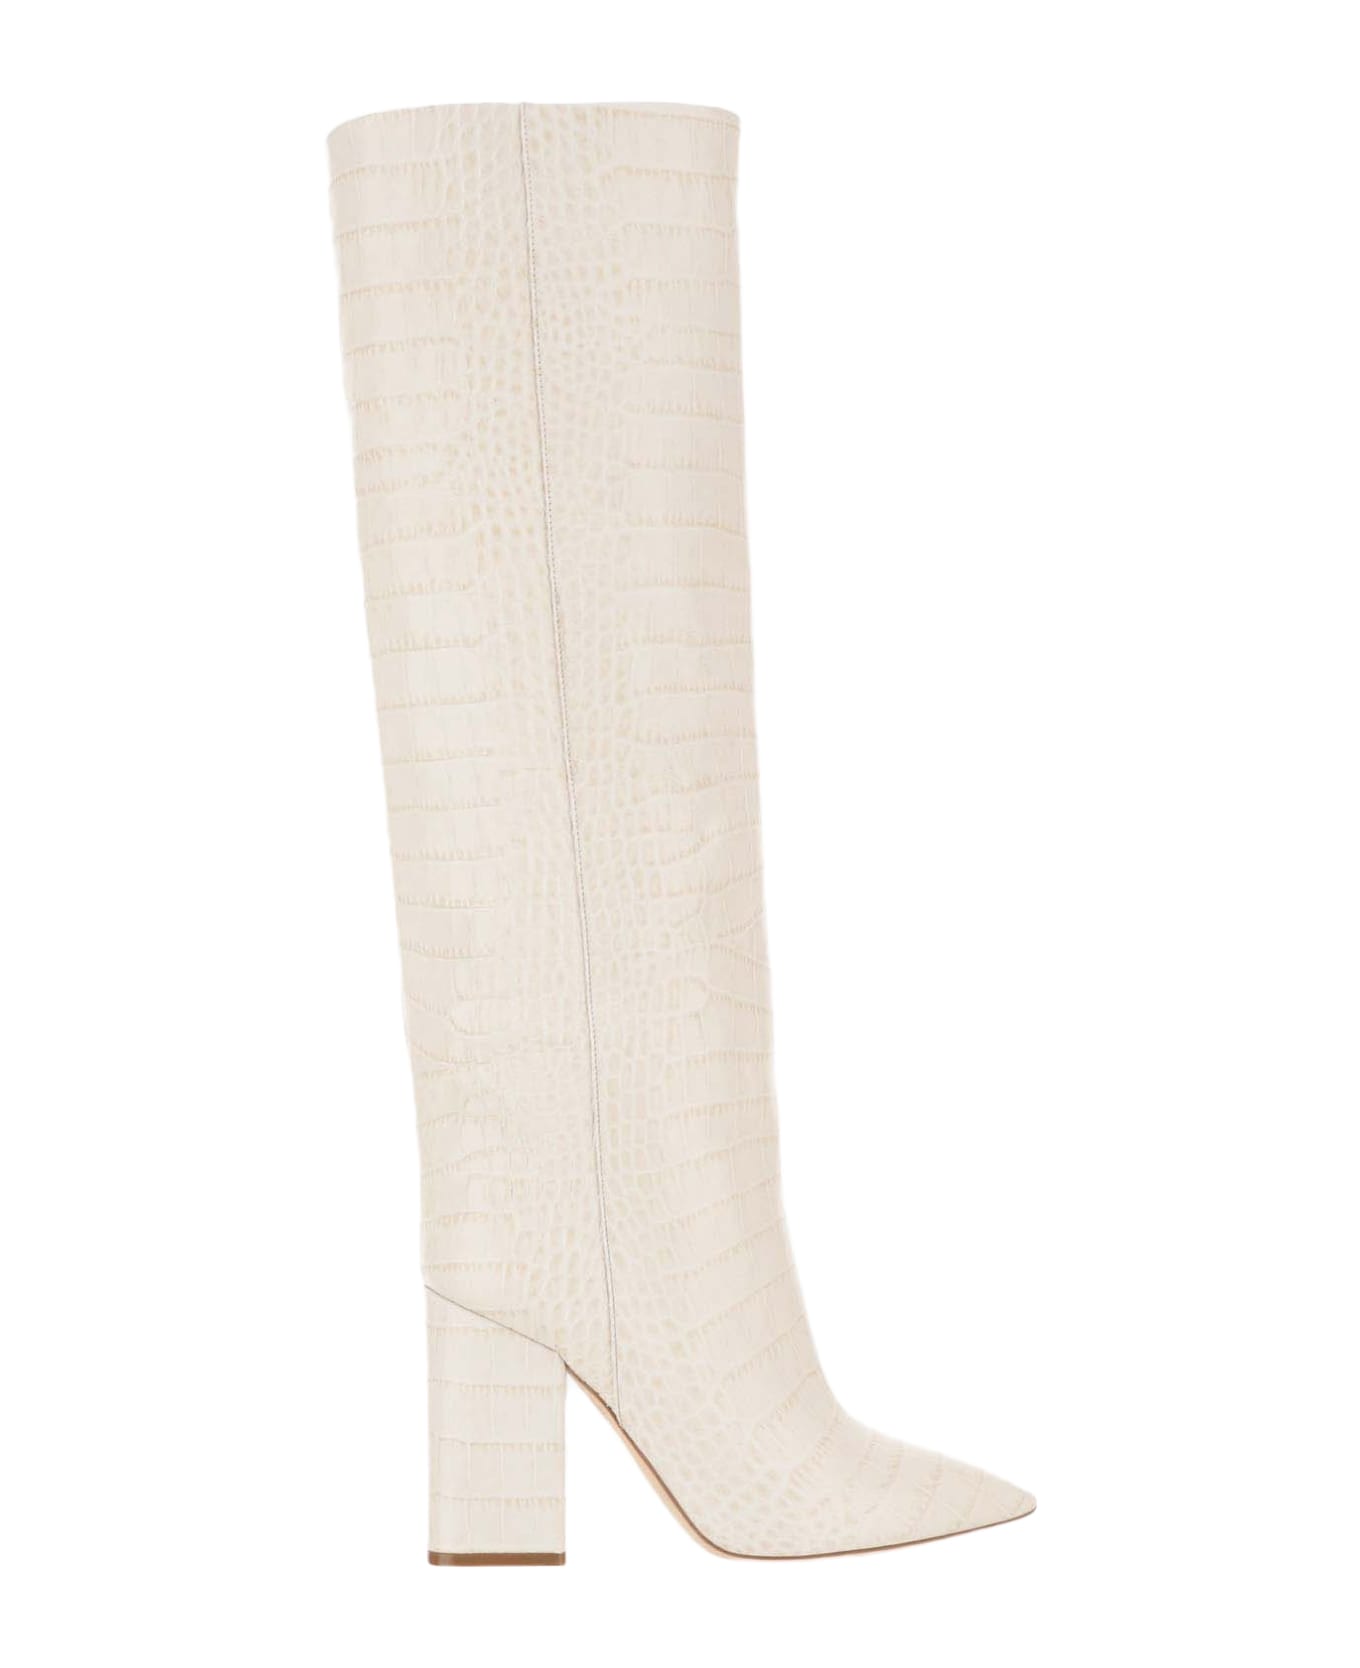 Paris Texas Leather Boot With Croc Print - Bianco